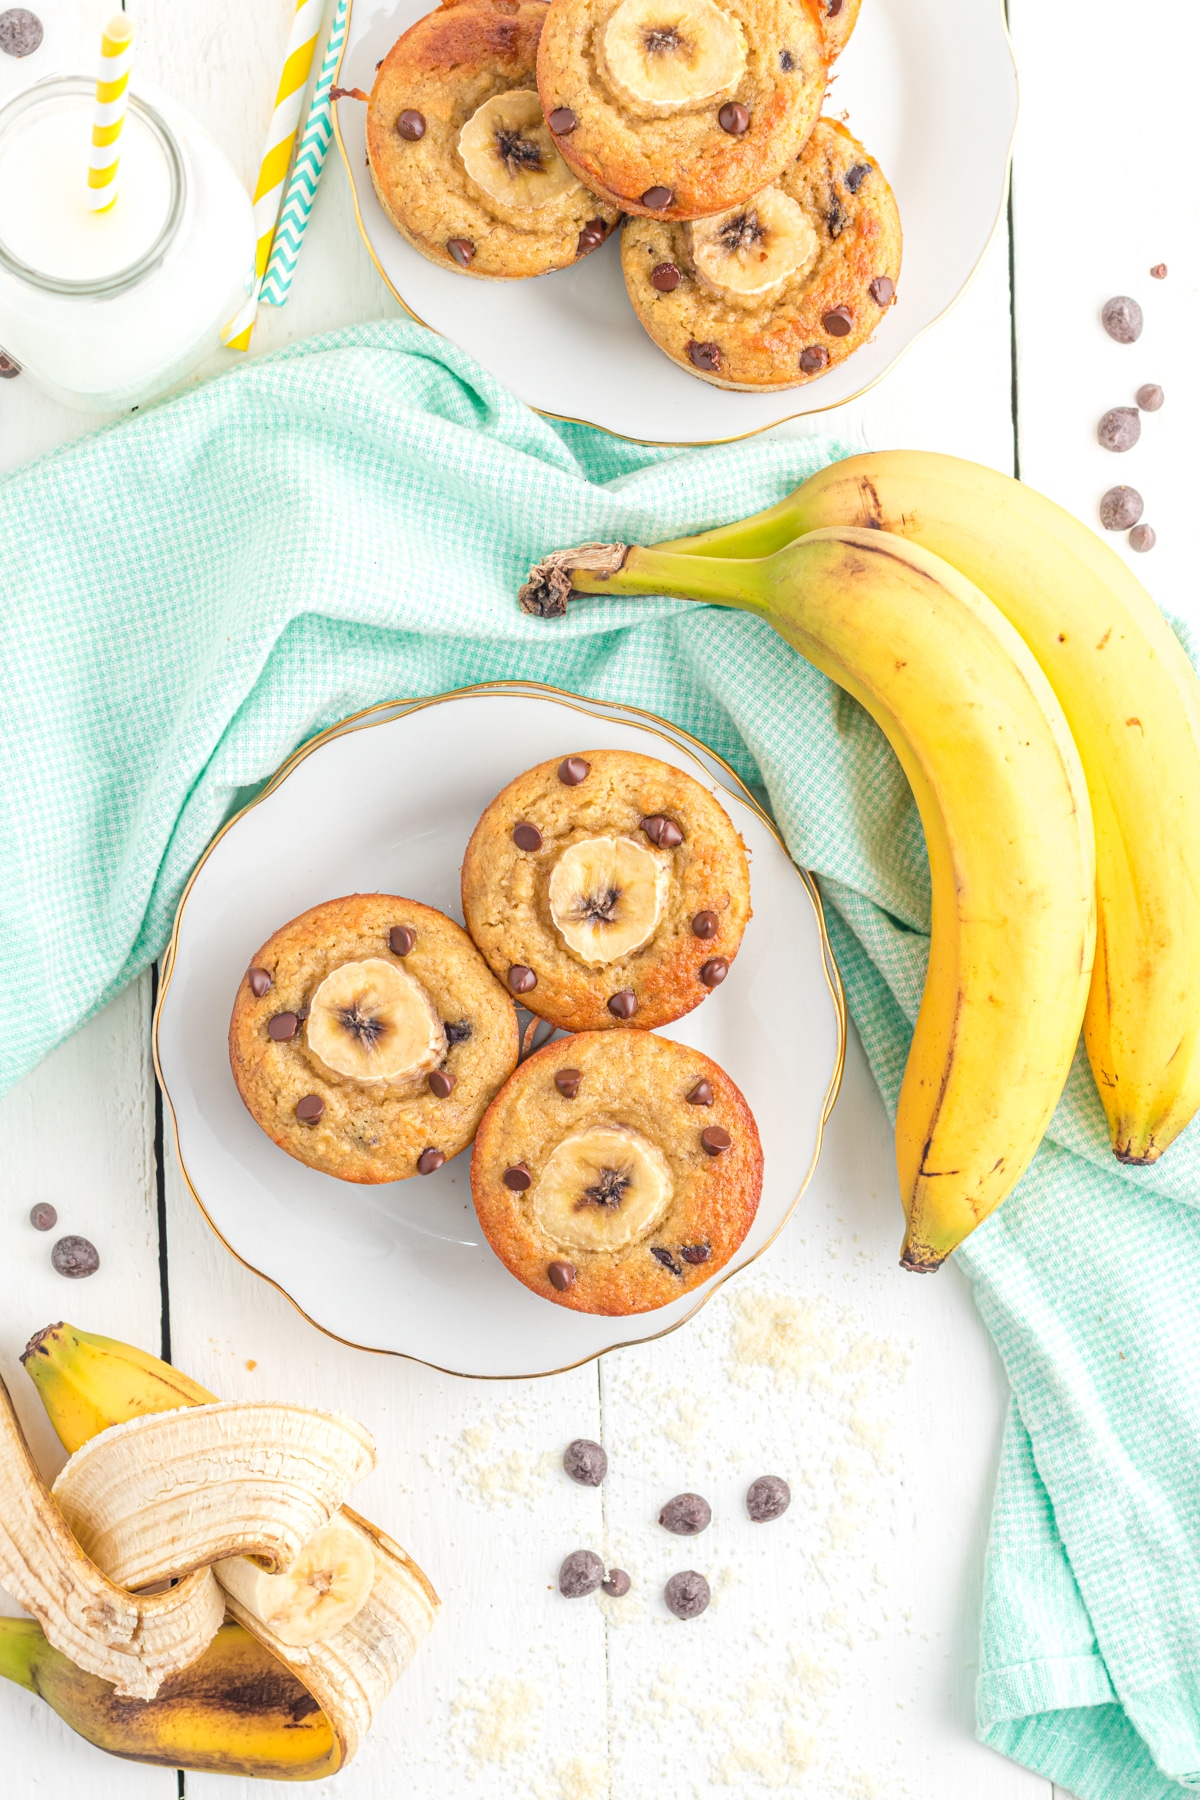 Plates of banana chocolate chip muffins on a plate with bananas and chocolate chips sprinkled around.